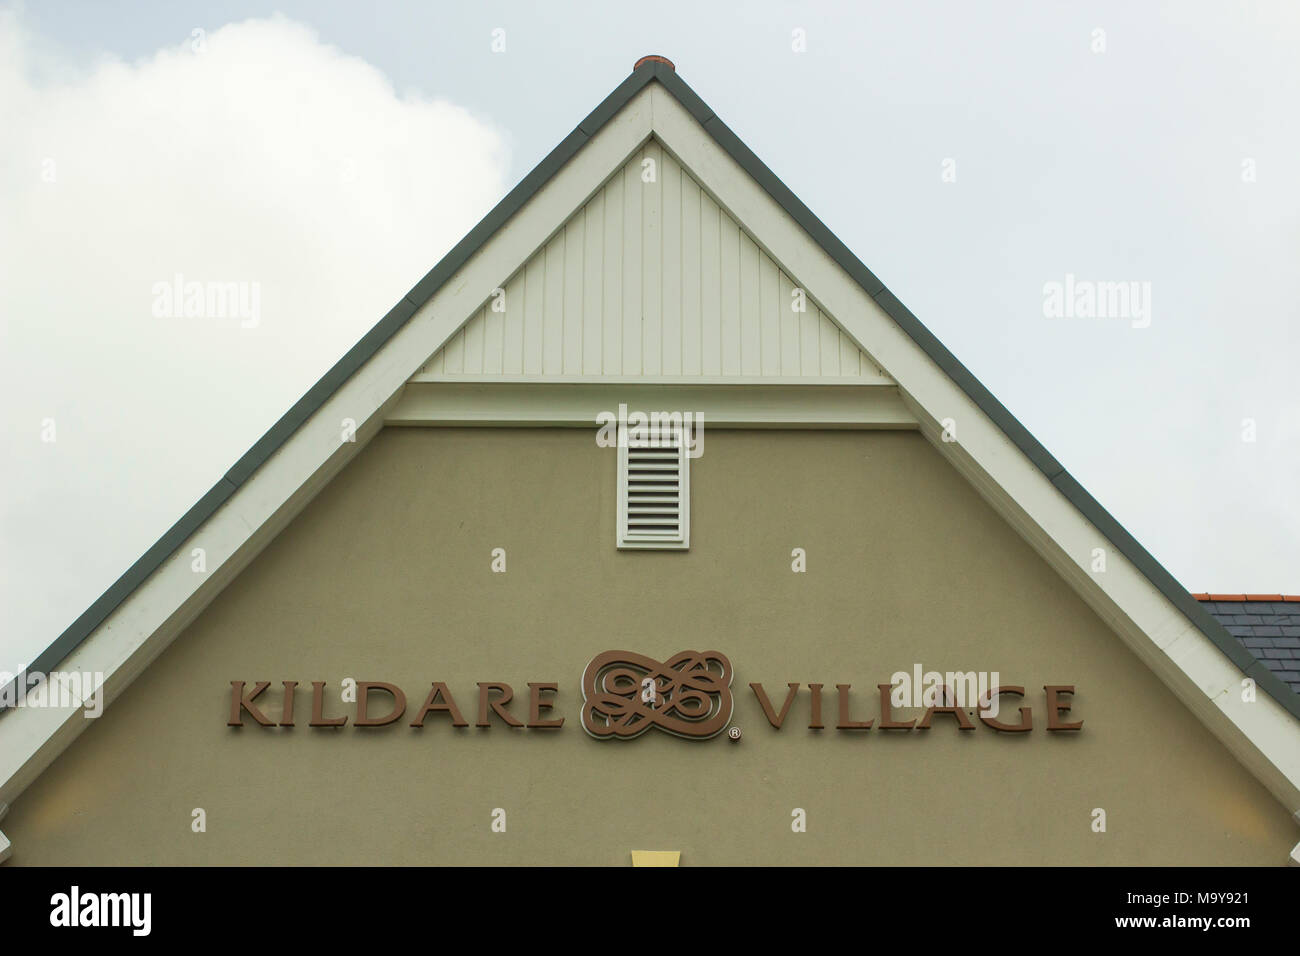 A large sign on a gable wall at the entrance to the prestigious Kildare Village retail park in County Kildare Ireland advertising,business,business l Stock Photo